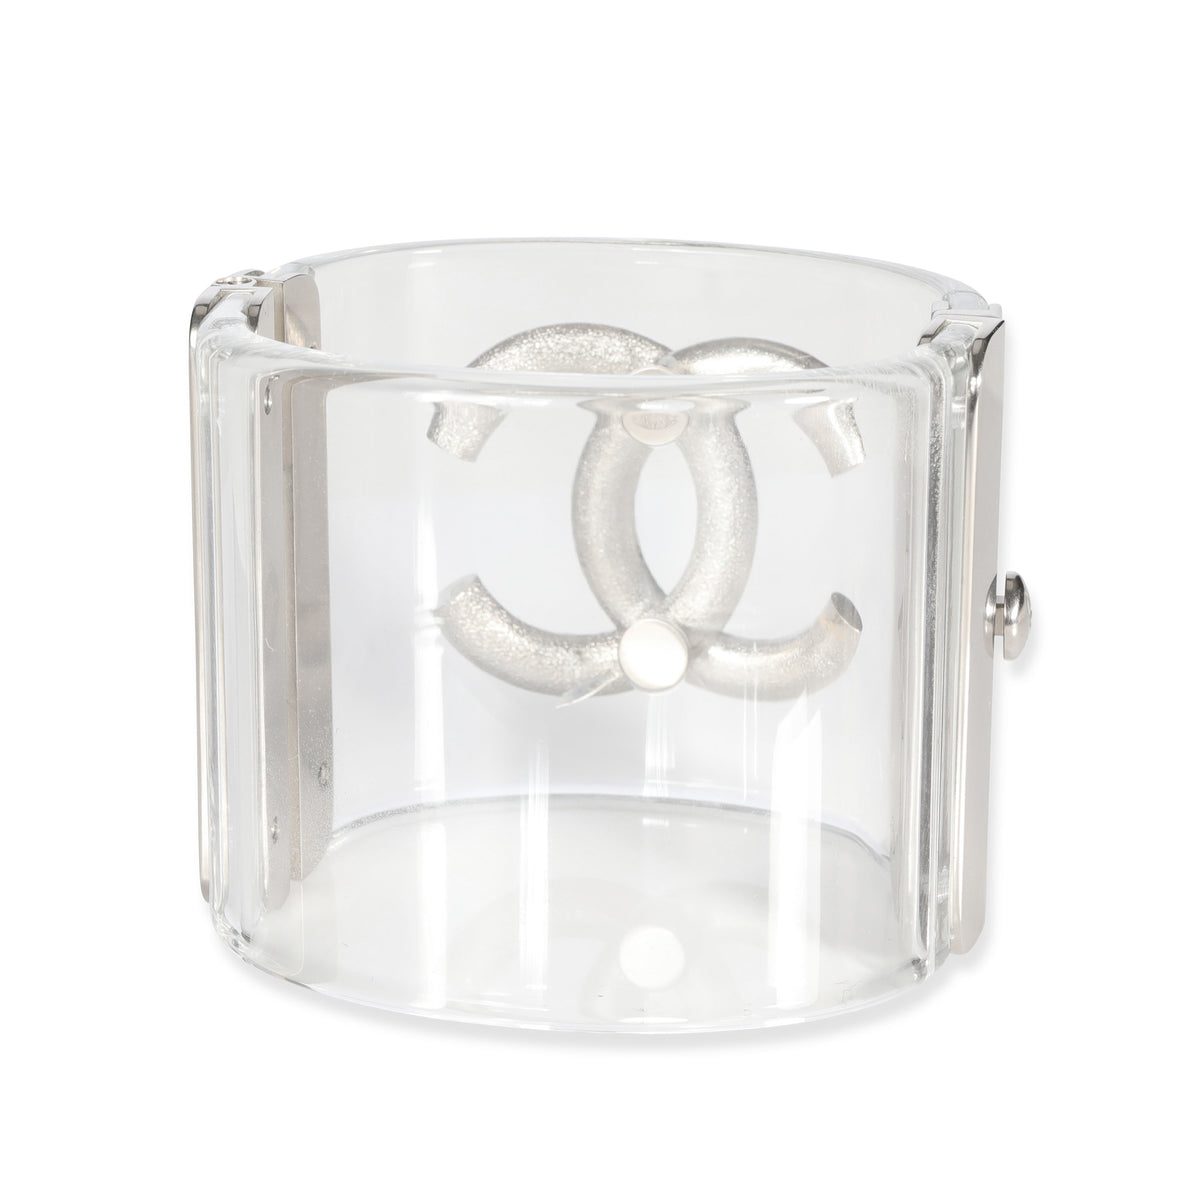 Chanel Cuff with Strass CC Logo, Summer 2016 Collection by WP